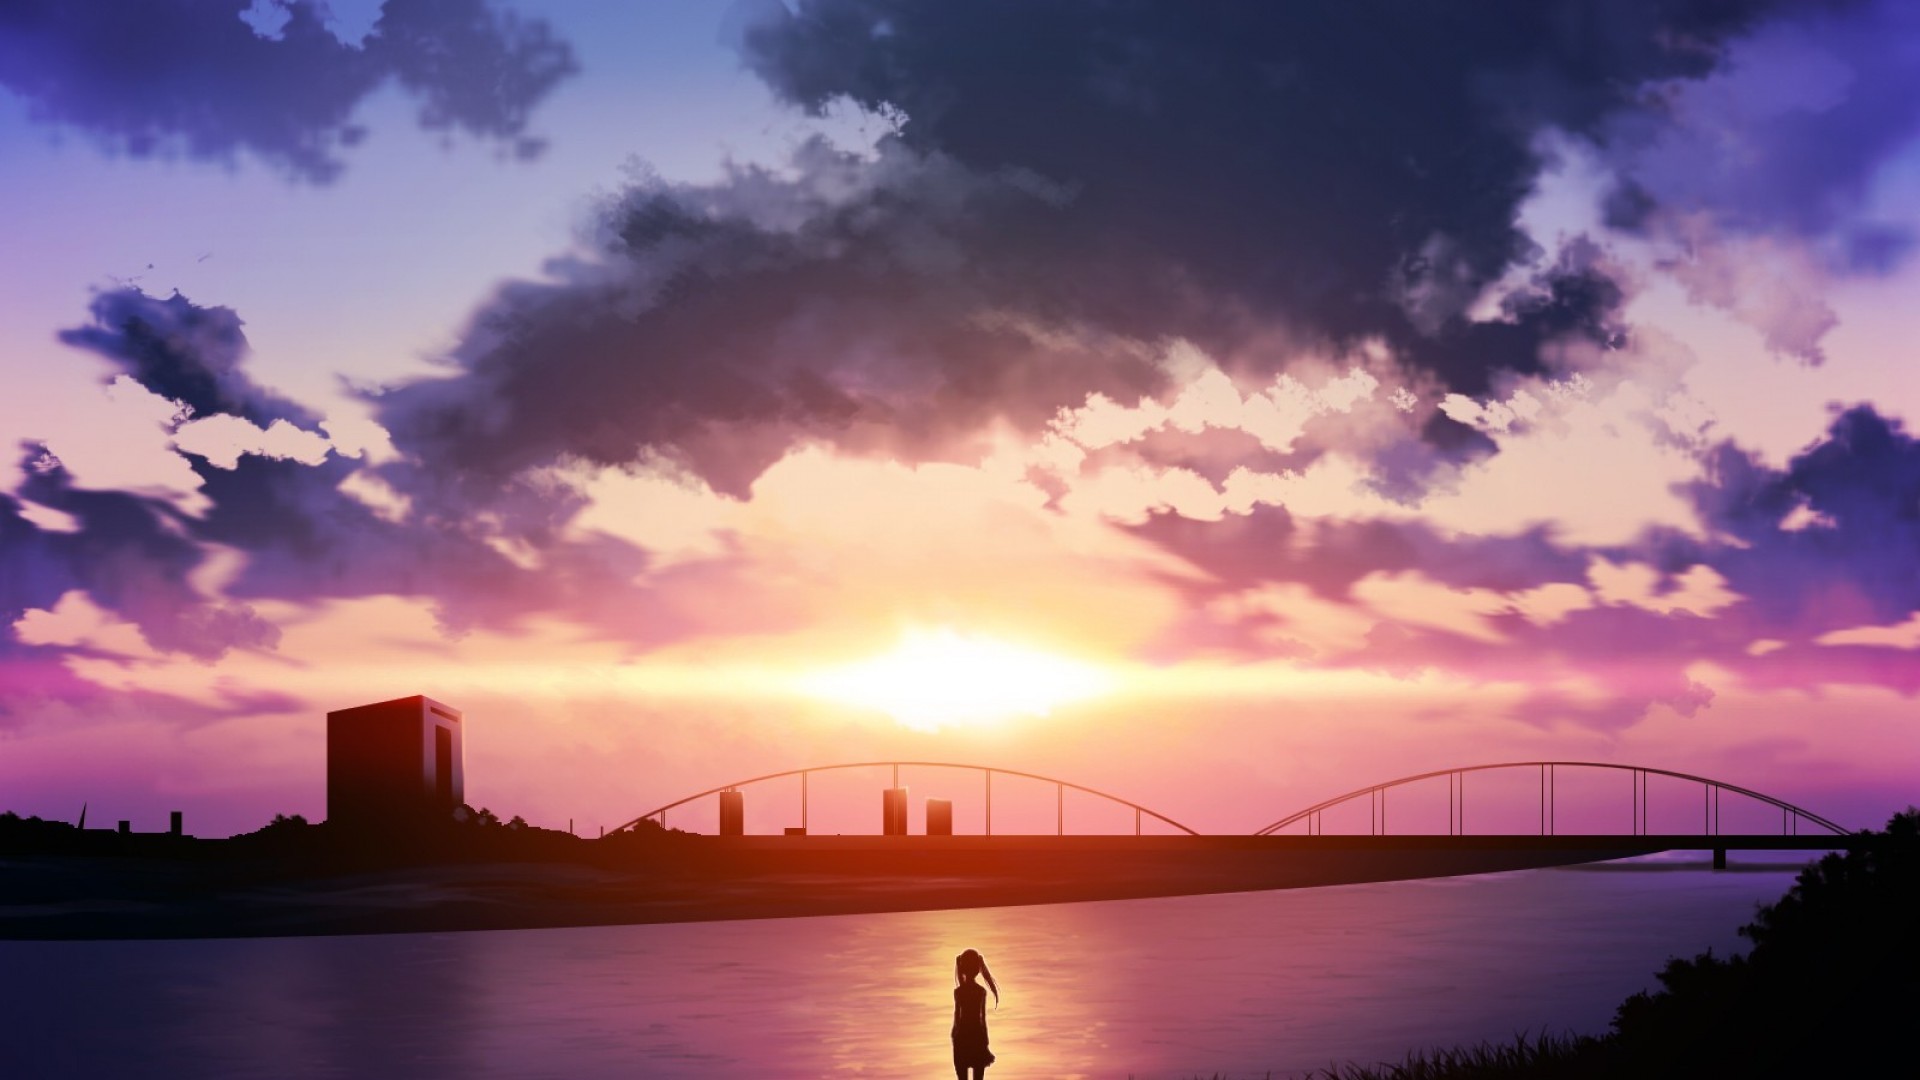 Anime Scenery wallpaper ·① Download free awesome ...